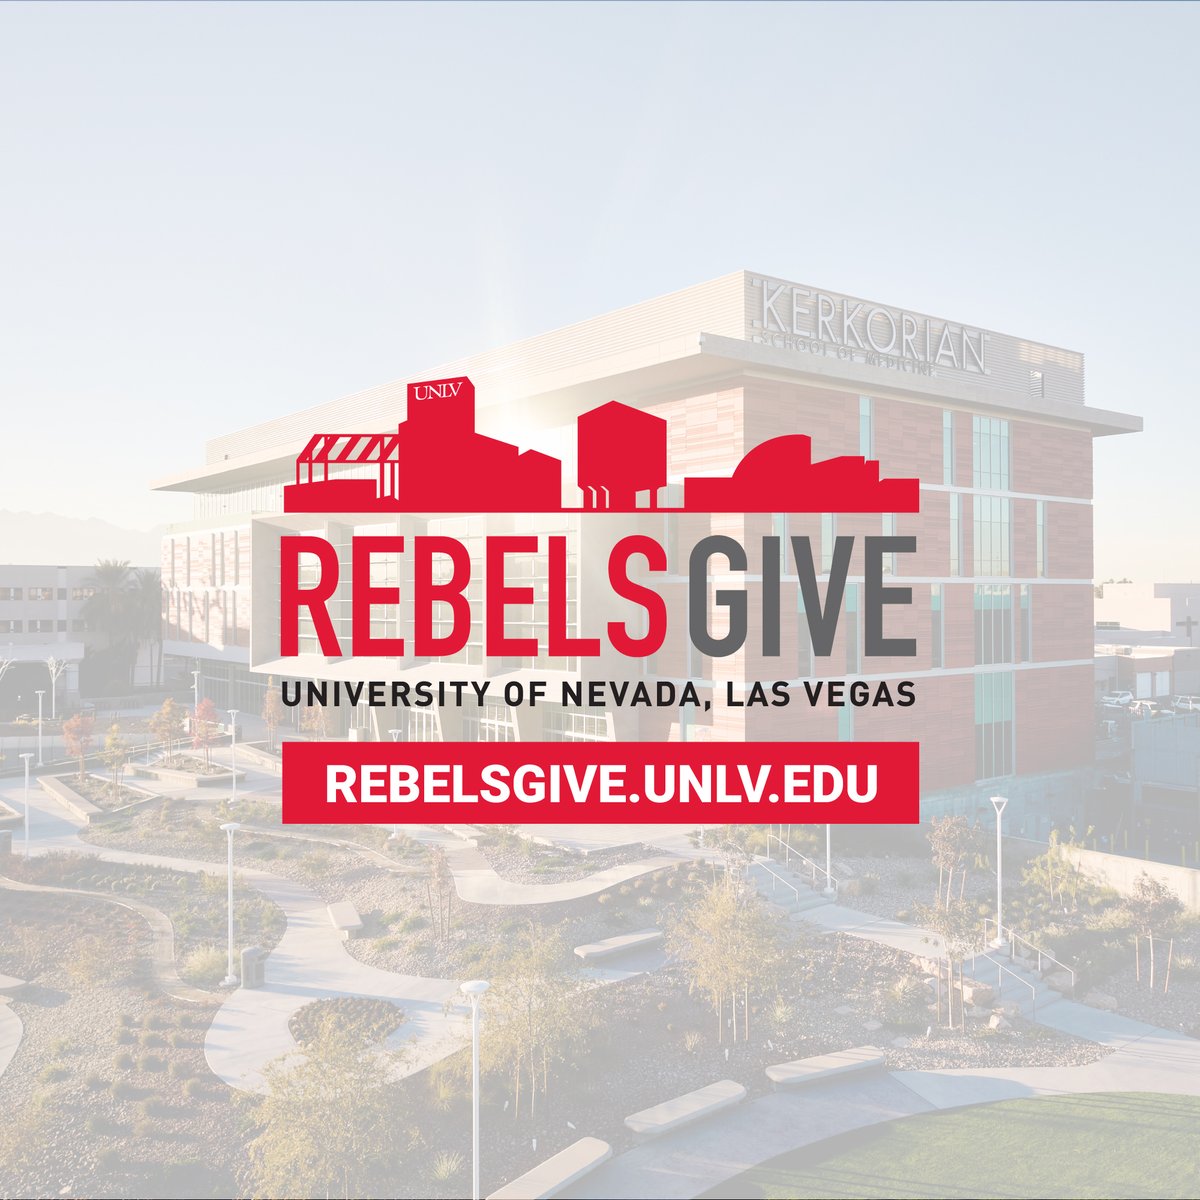 Today we are celebrating #RebelsGive ➡ The power of community! Help us transform healthcare in Southern Nevada by supporting our continued efforts to educate future doctors, engage in medical research, and provide high-quality care to the community! 🔗 rebelsgive.unlv.edu/pages/kirk-ker…